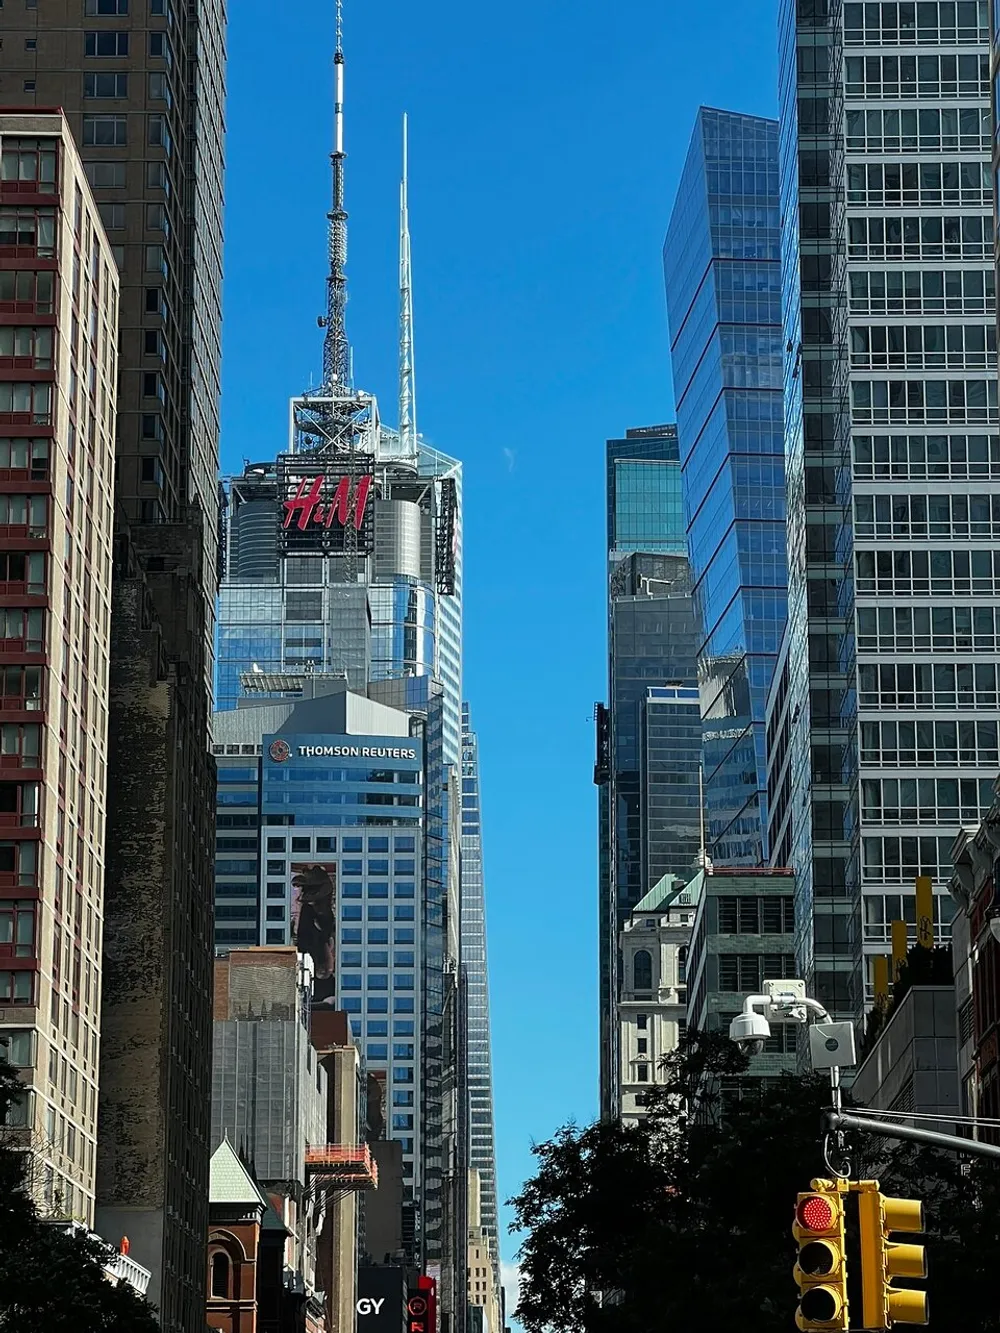 The image showcases a clear day in a bustling city with tall skyscrapers including one with the HM logo and a traffic light in the foreground displaying a red stop signal